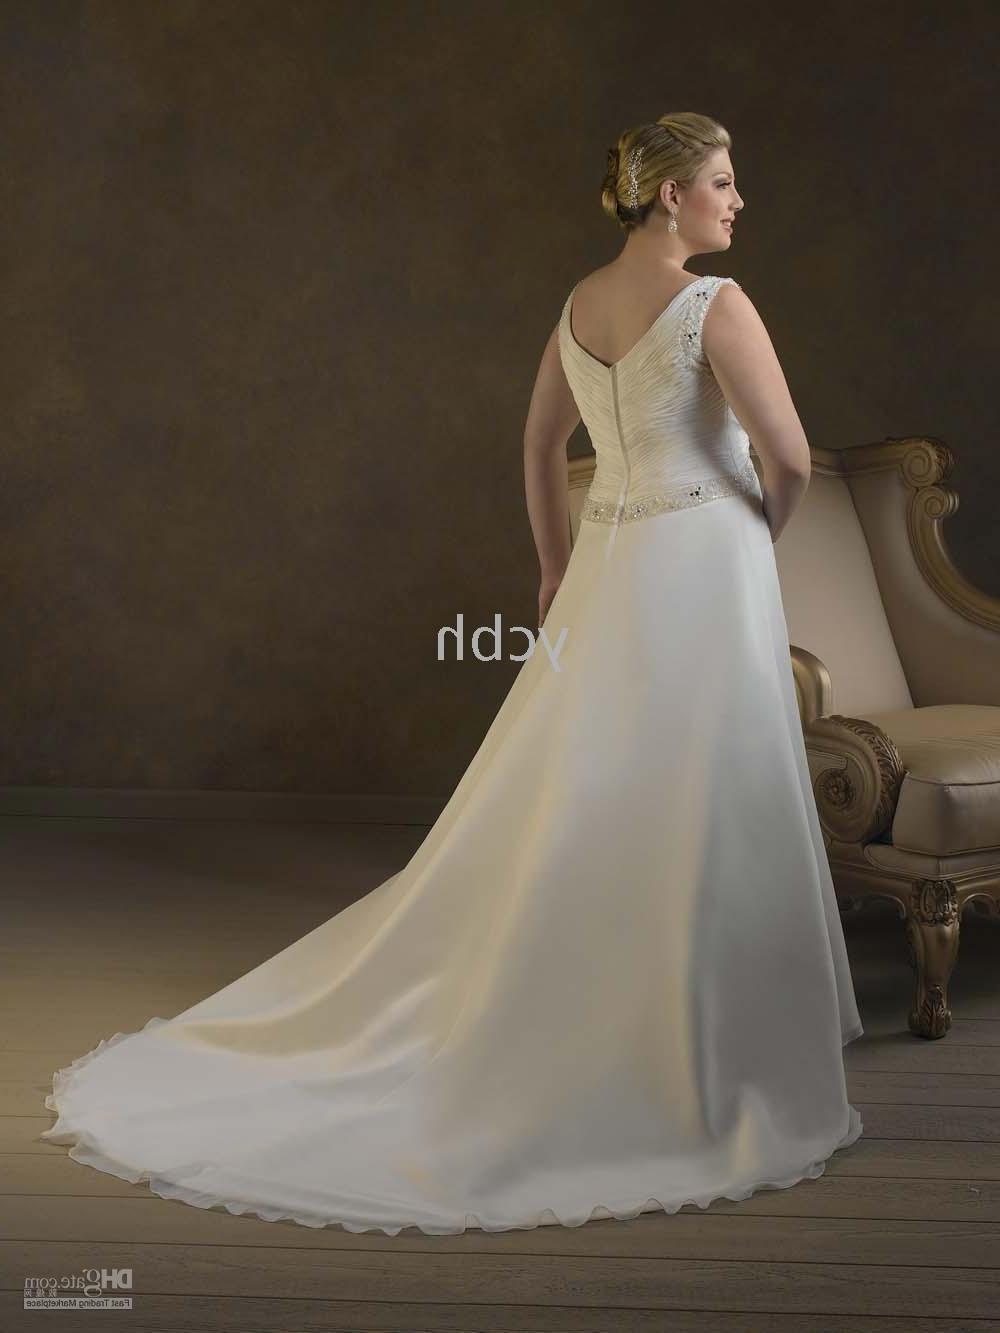 free shipping hot sale custom made Bridal Gown Wedding Dresses wedding gown